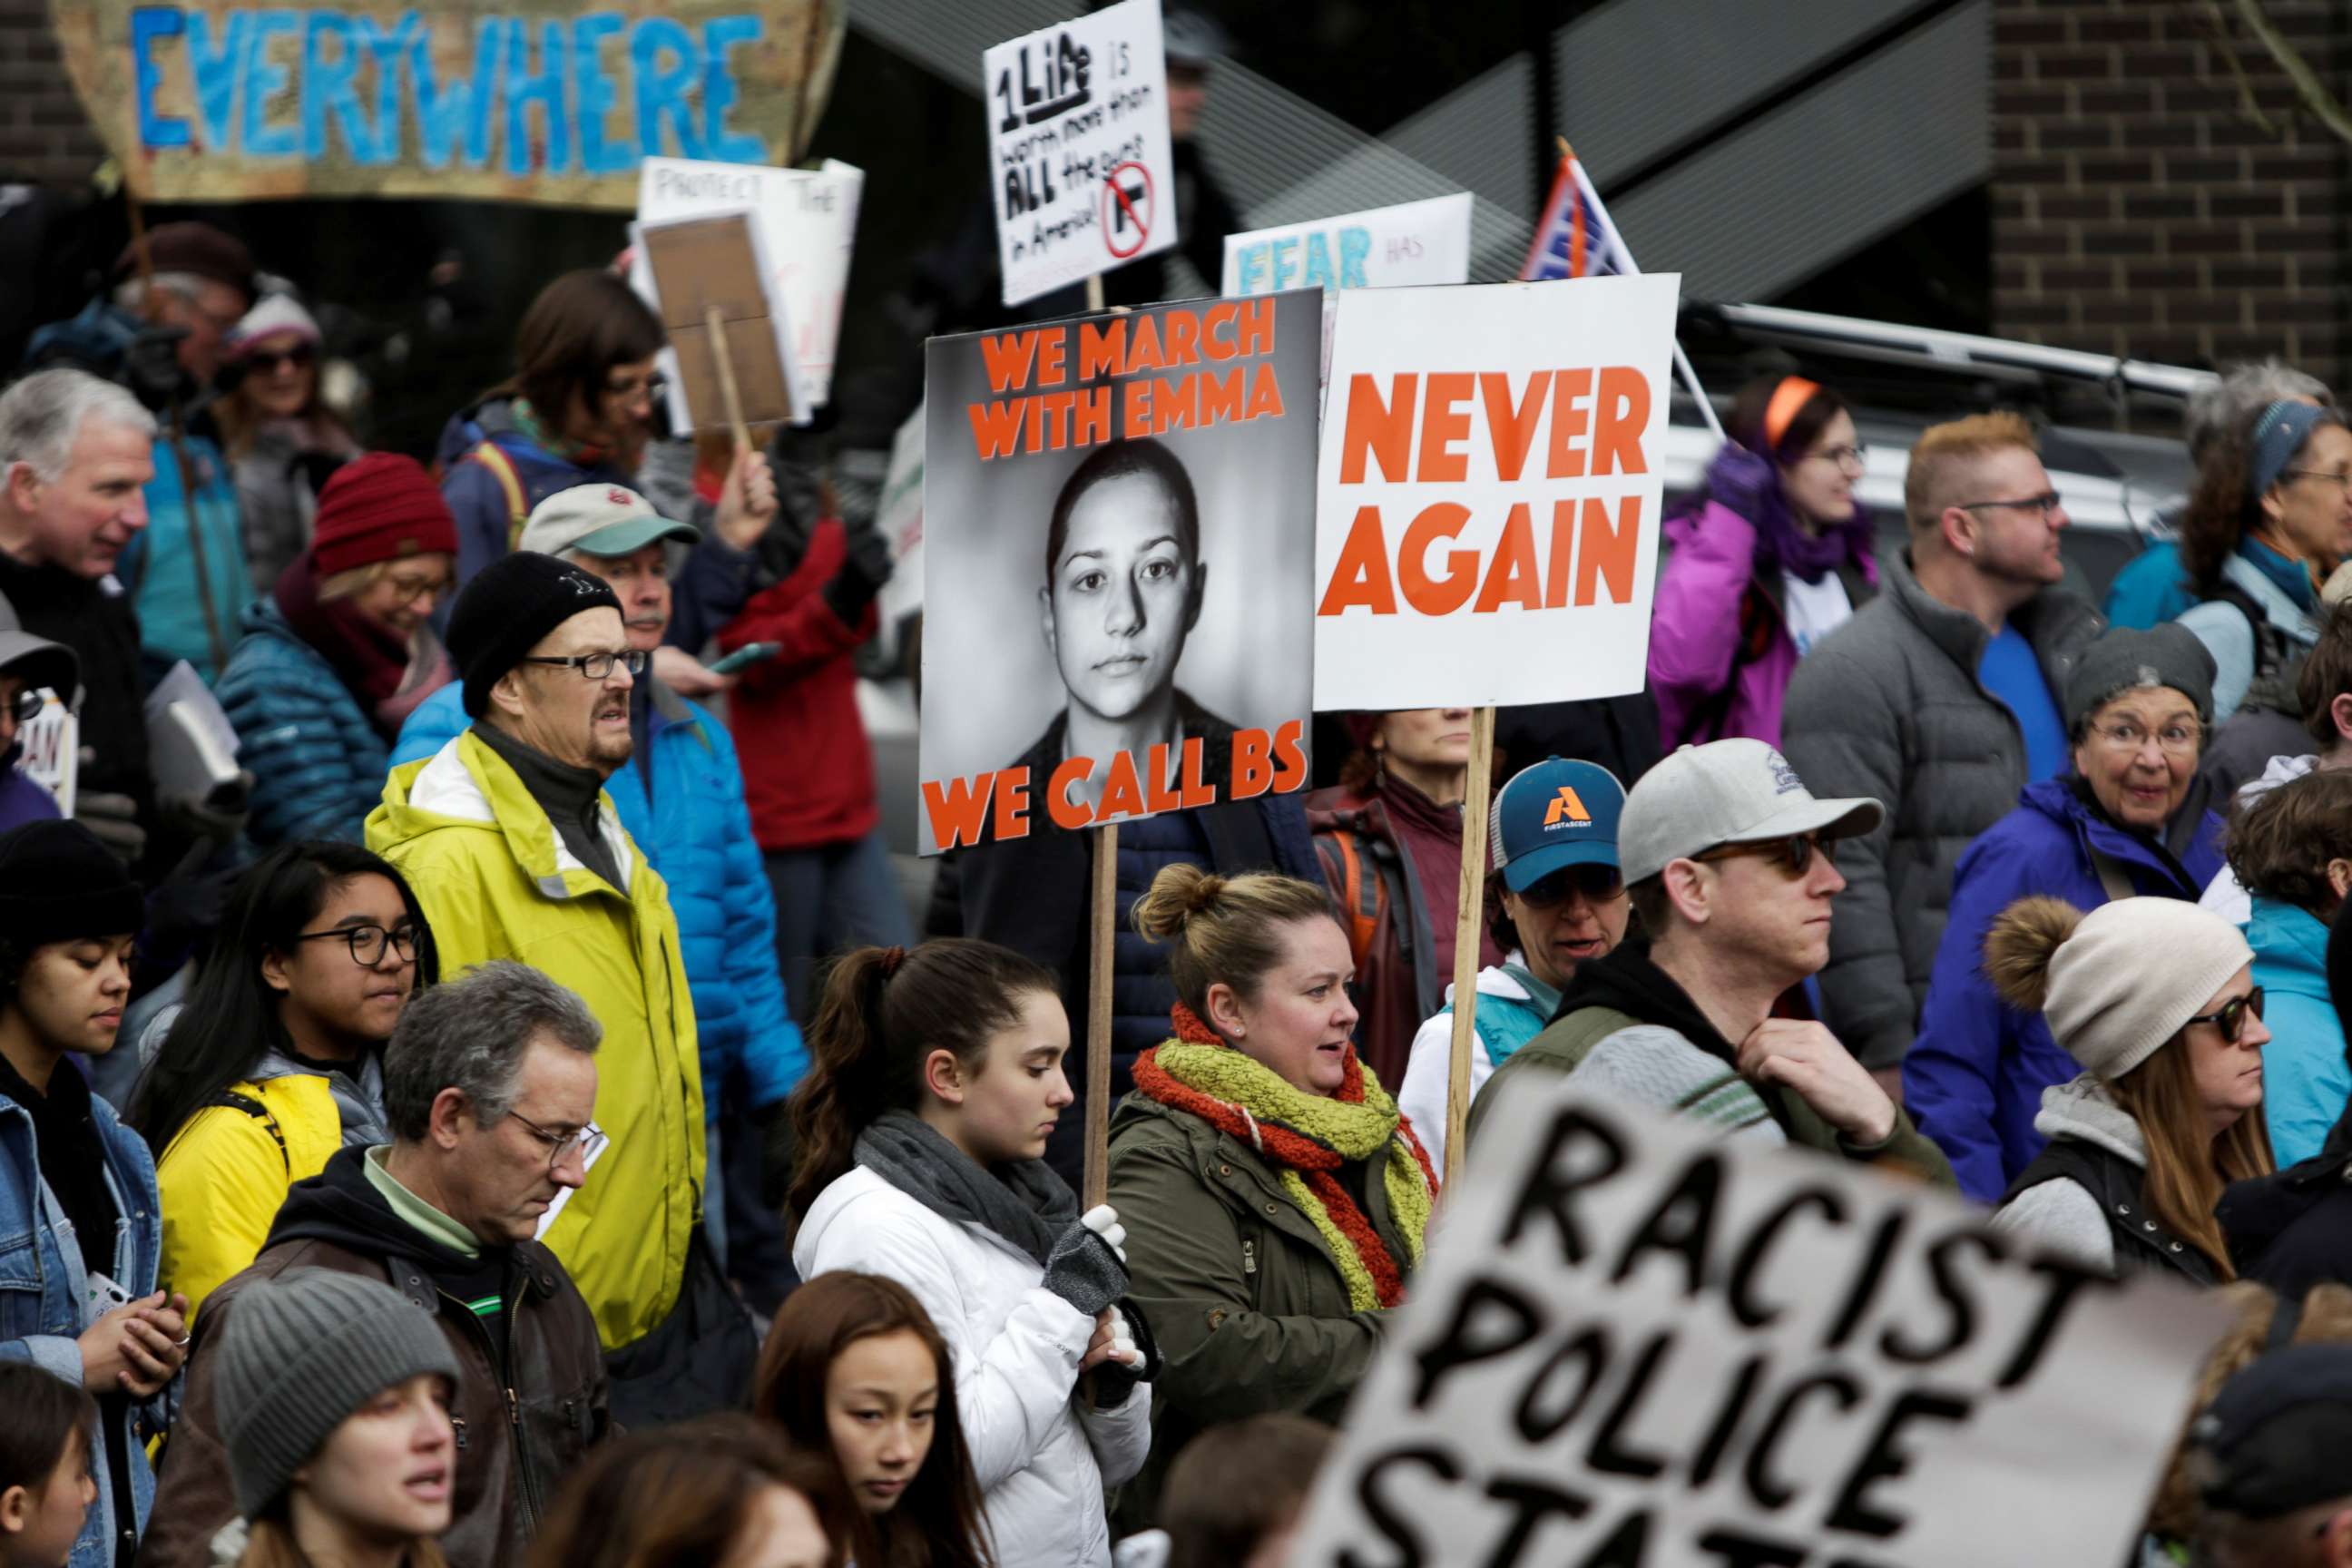 PHOTO: Parkland, Florida school shooting survivor Emma Gonzalez is pictured on a sign during a March for Our Lives demonstration demanding gun control in Seattle, Washington, March 24, 2018.